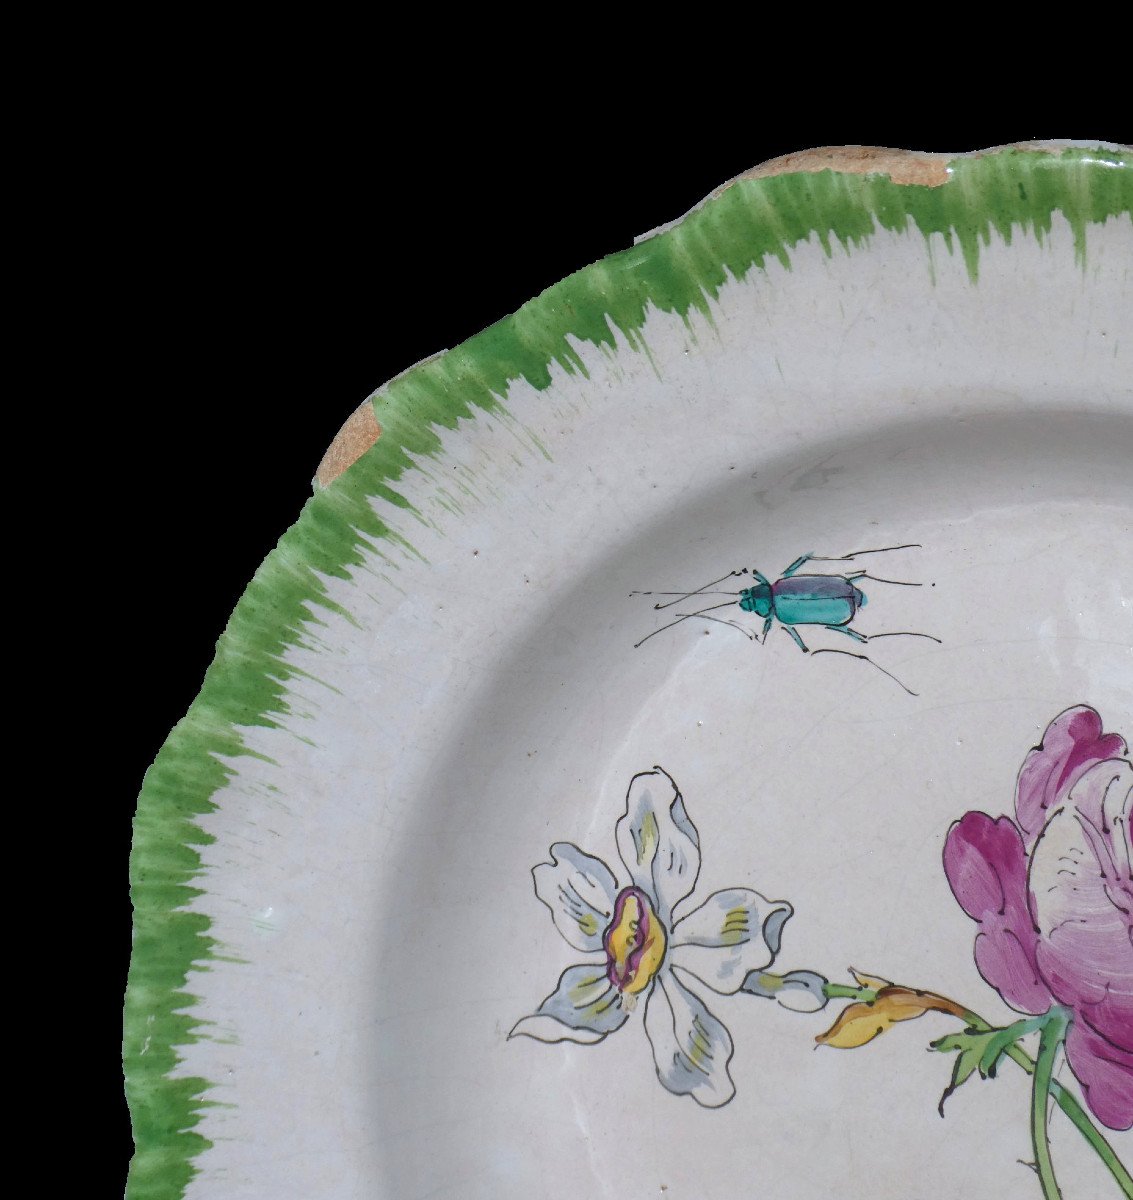 18th Century Earthenware Plate From The Widow Perrin's Workshop In Marseille, Decorated With Flowers & Insects-photo-1